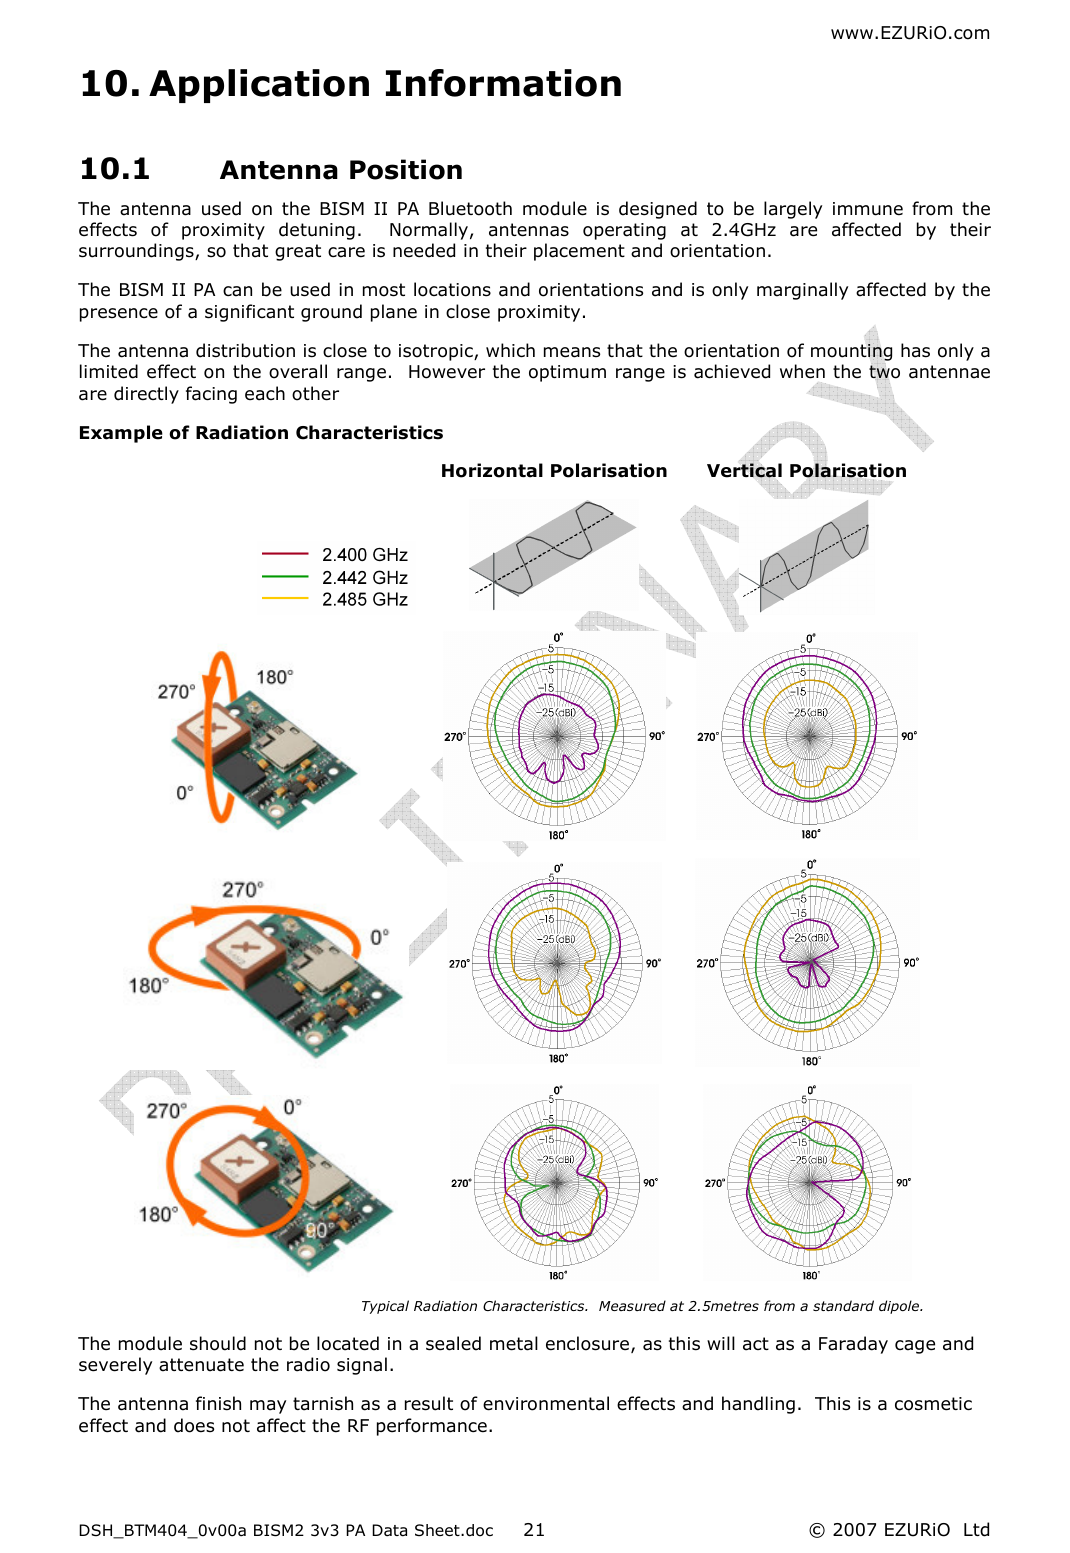 www.EZURiO.com DSH_BTM404_0v00a BISM2 3v3 PA Data Sheet.doc  © 2007 EZURiO  Ltd  2110. Application Information 10.1 Antenna Position The  antenna  used  on  the  BISM II  PA Bluetooth  module  is  designed  to  be  largely  immune  from  the effects  of  proximity  detuning.    Normally,  antennas  operating  at  2.4GHz  are  affected  by  their surroundings, so that great care is needed in their placement and orientation. The BISM II PA can be used in most locations and orientations and is only marginally affected by the presence of a significant ground plane in close proximity. The antenna distribution is close to isotropic, which means that the orientation of mounting has only a limited effect on the overall range.  However the optimum range is achieved when the two antennae are directly facing each other Example of Radiation Characteristics  Horizontal Polarisation  Vertical Polarisation            Typical Radiation Characteristics.  Measured at 2.5metres from a standard dipole.                  The module should not be located in a sealed metal enclosure, as this will act as a Faraday cage and severely attenuate the radio signal. The antenna finish may tarnish as a result of environmental effects and handling.  This is a cosmetic effect and does not affect the RF performance.  